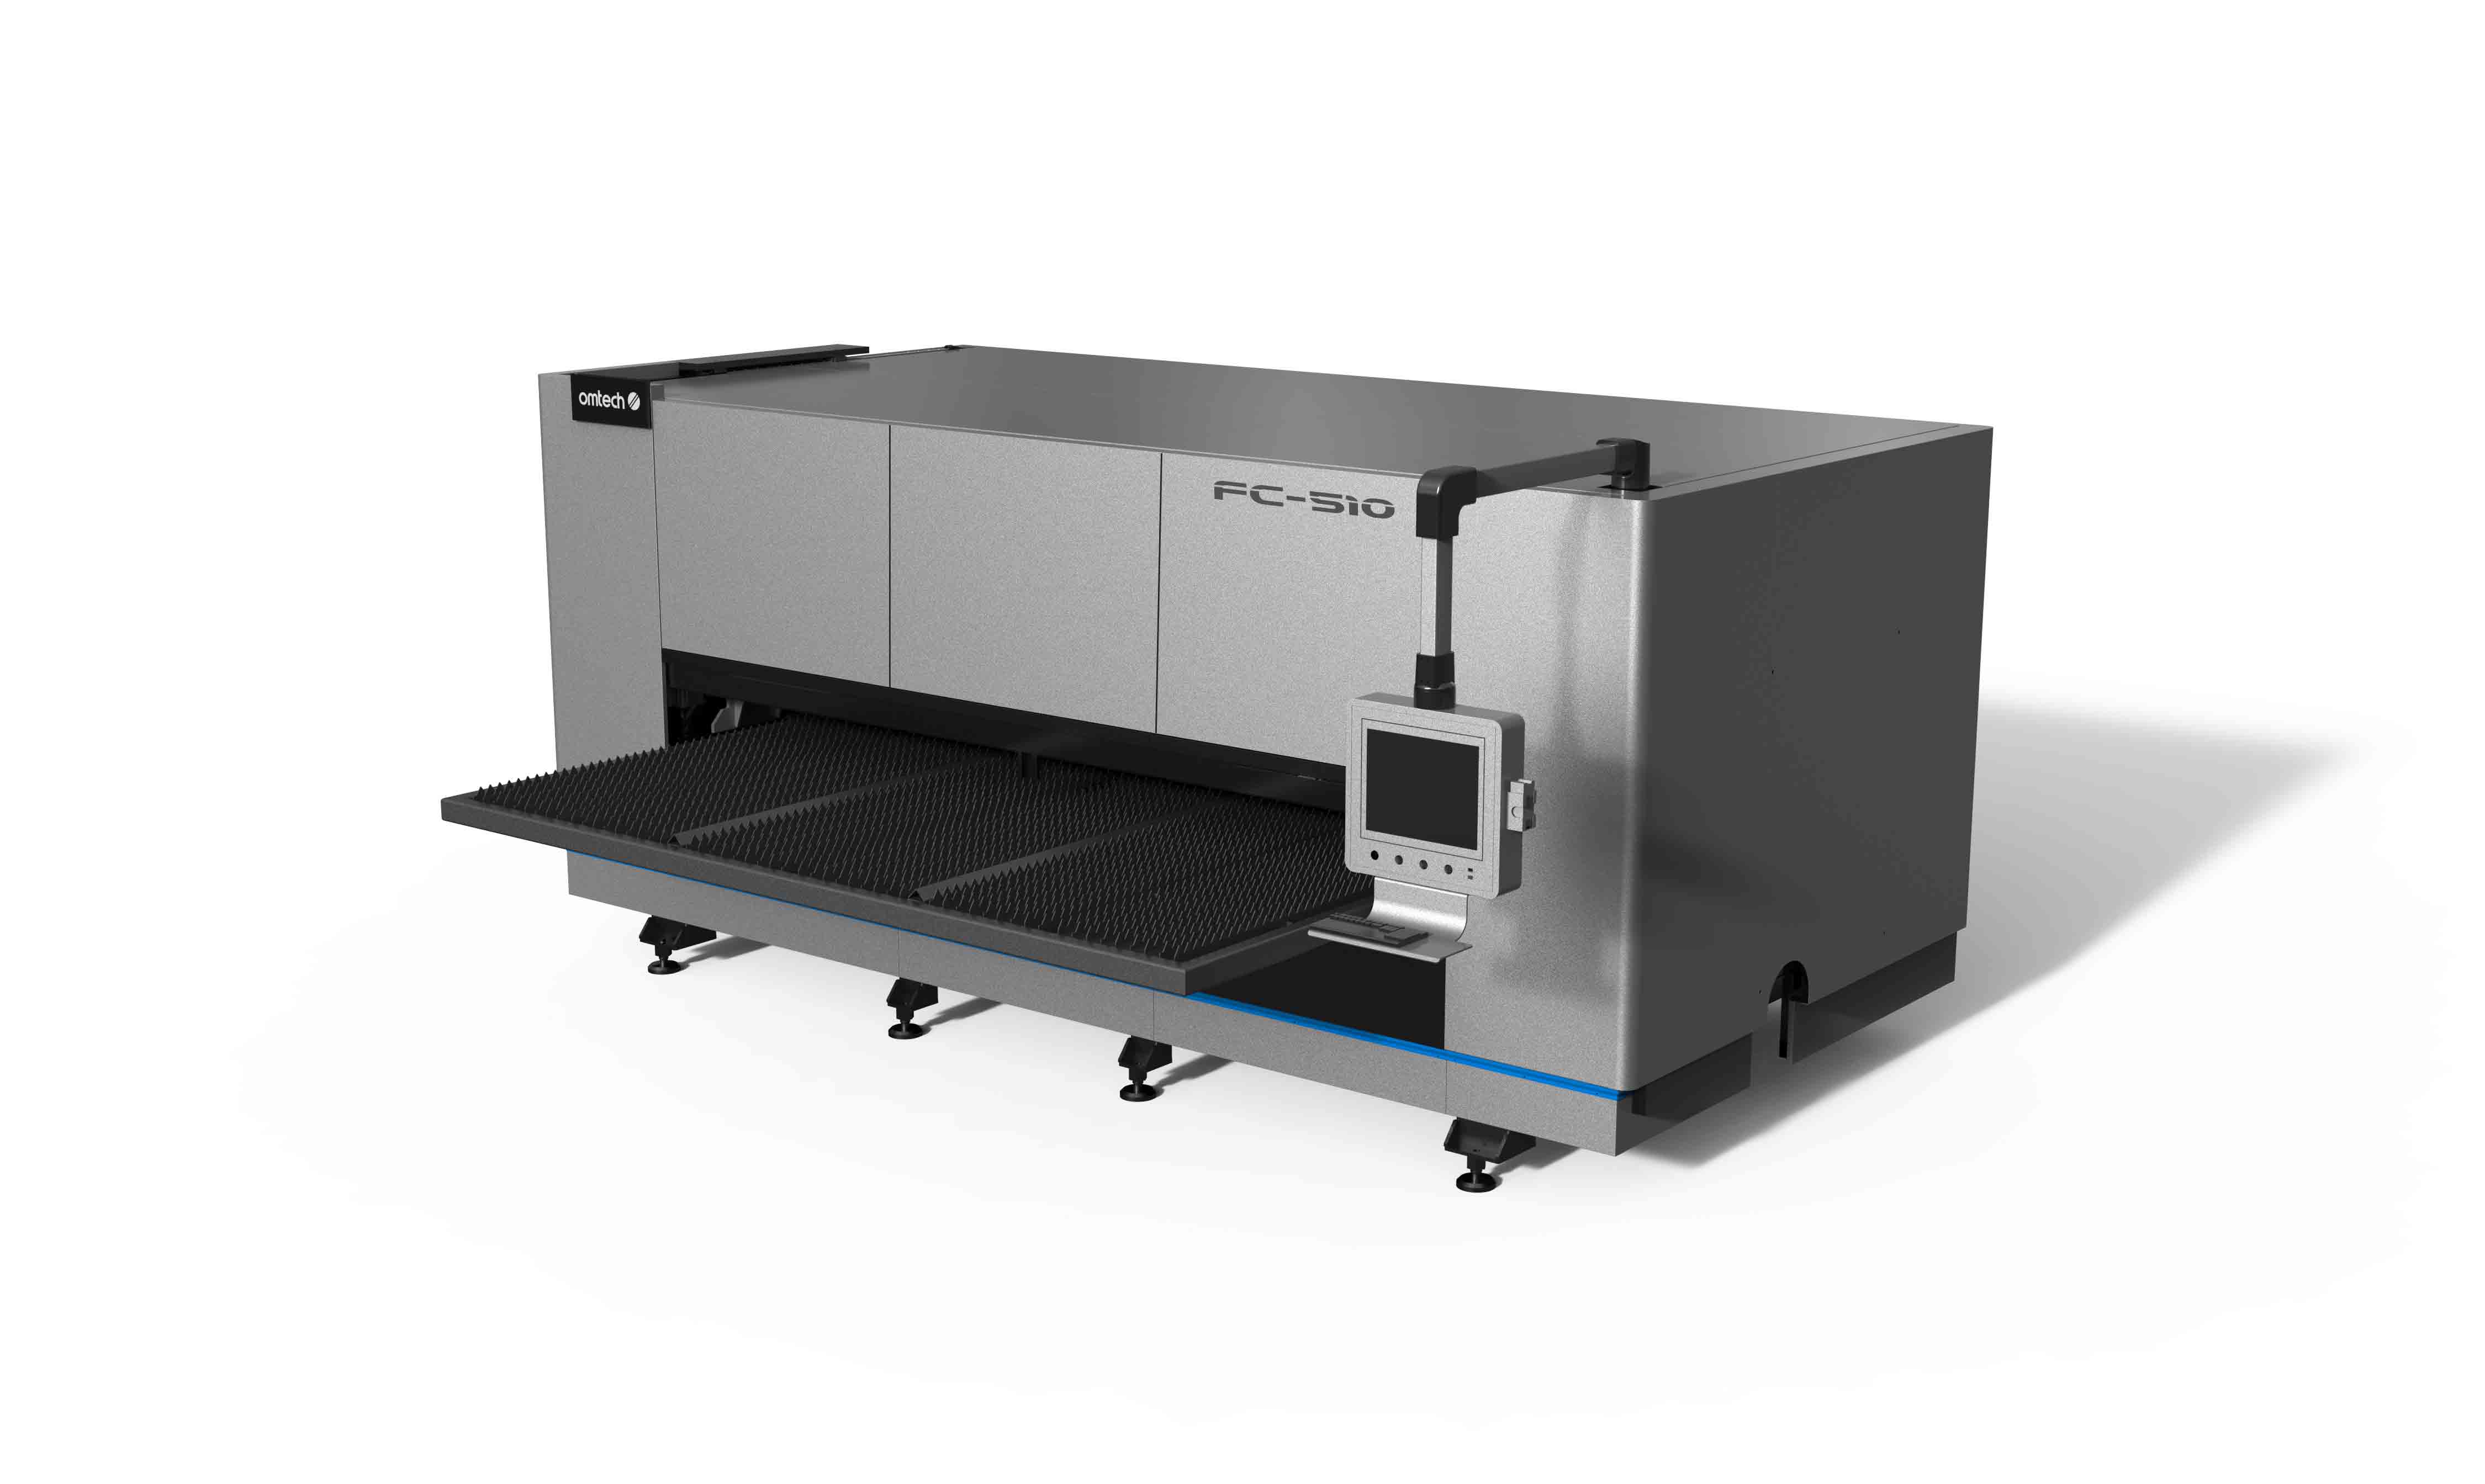 13 x 6 ft 1000 to 6000w IPG CAMFive Laser Fiber Metal Cutter FC136A For  Steels and aluminum